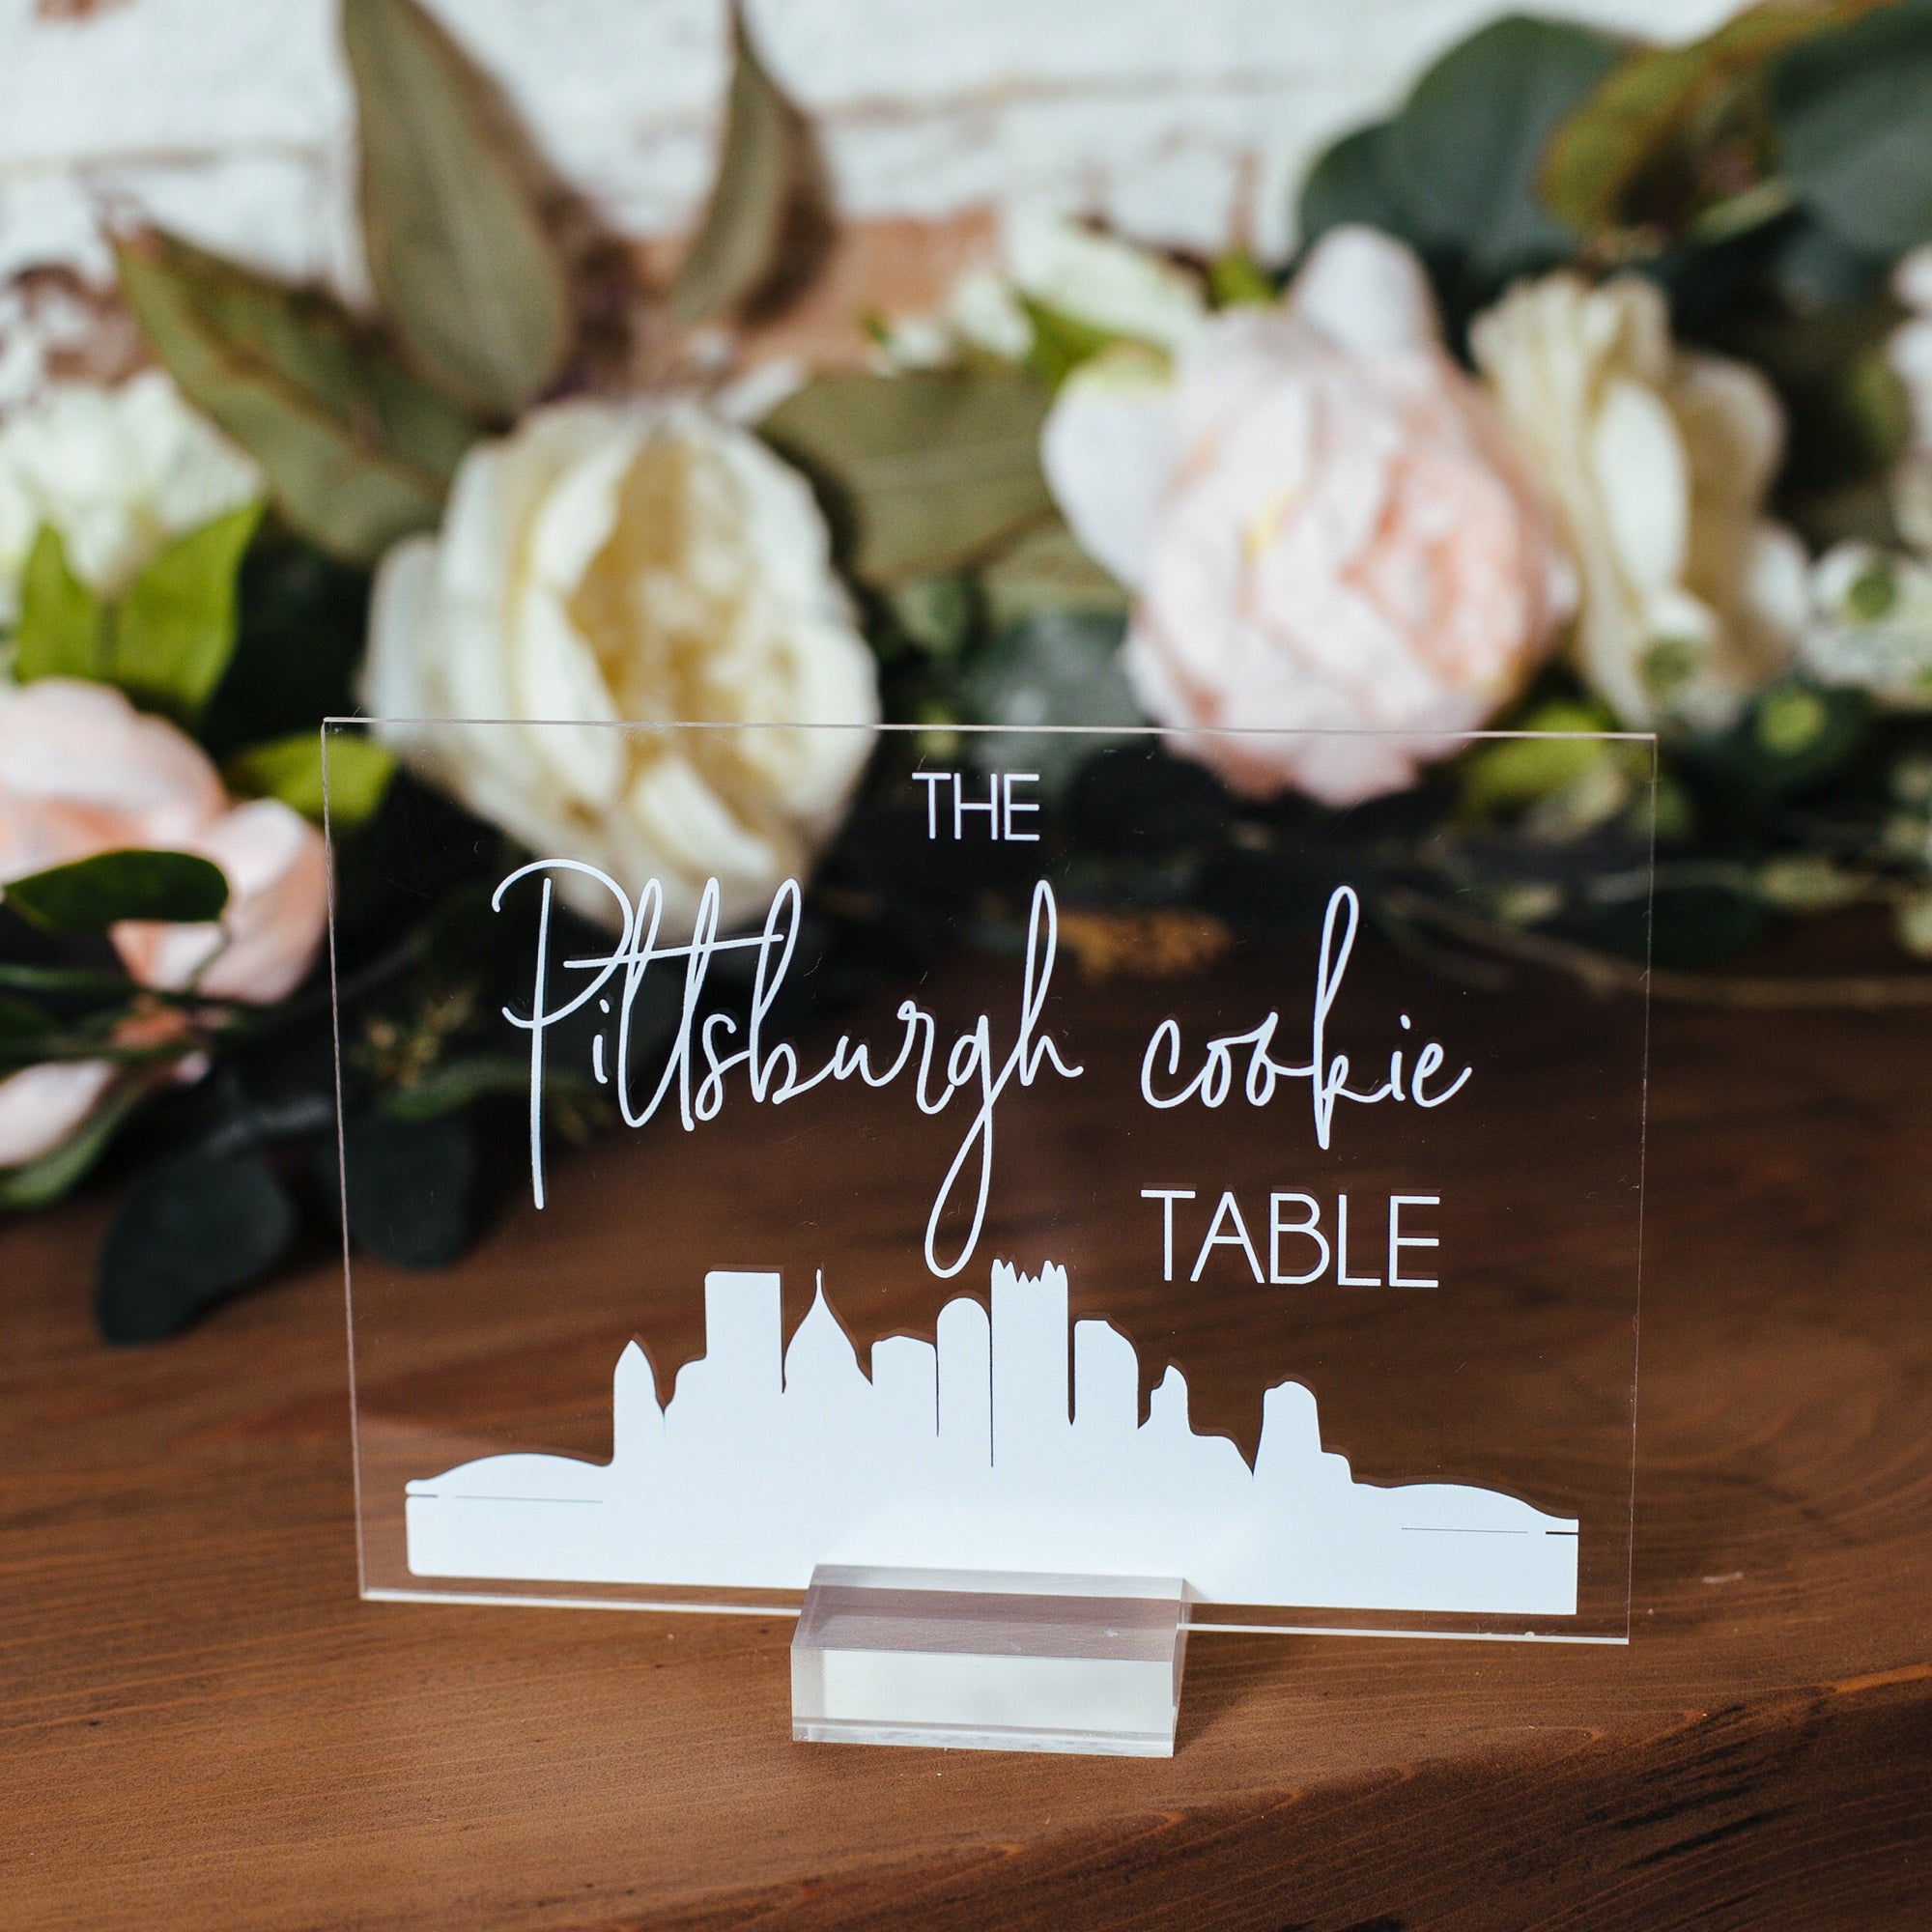 Pittsburgh Cookie Table S3-AS46